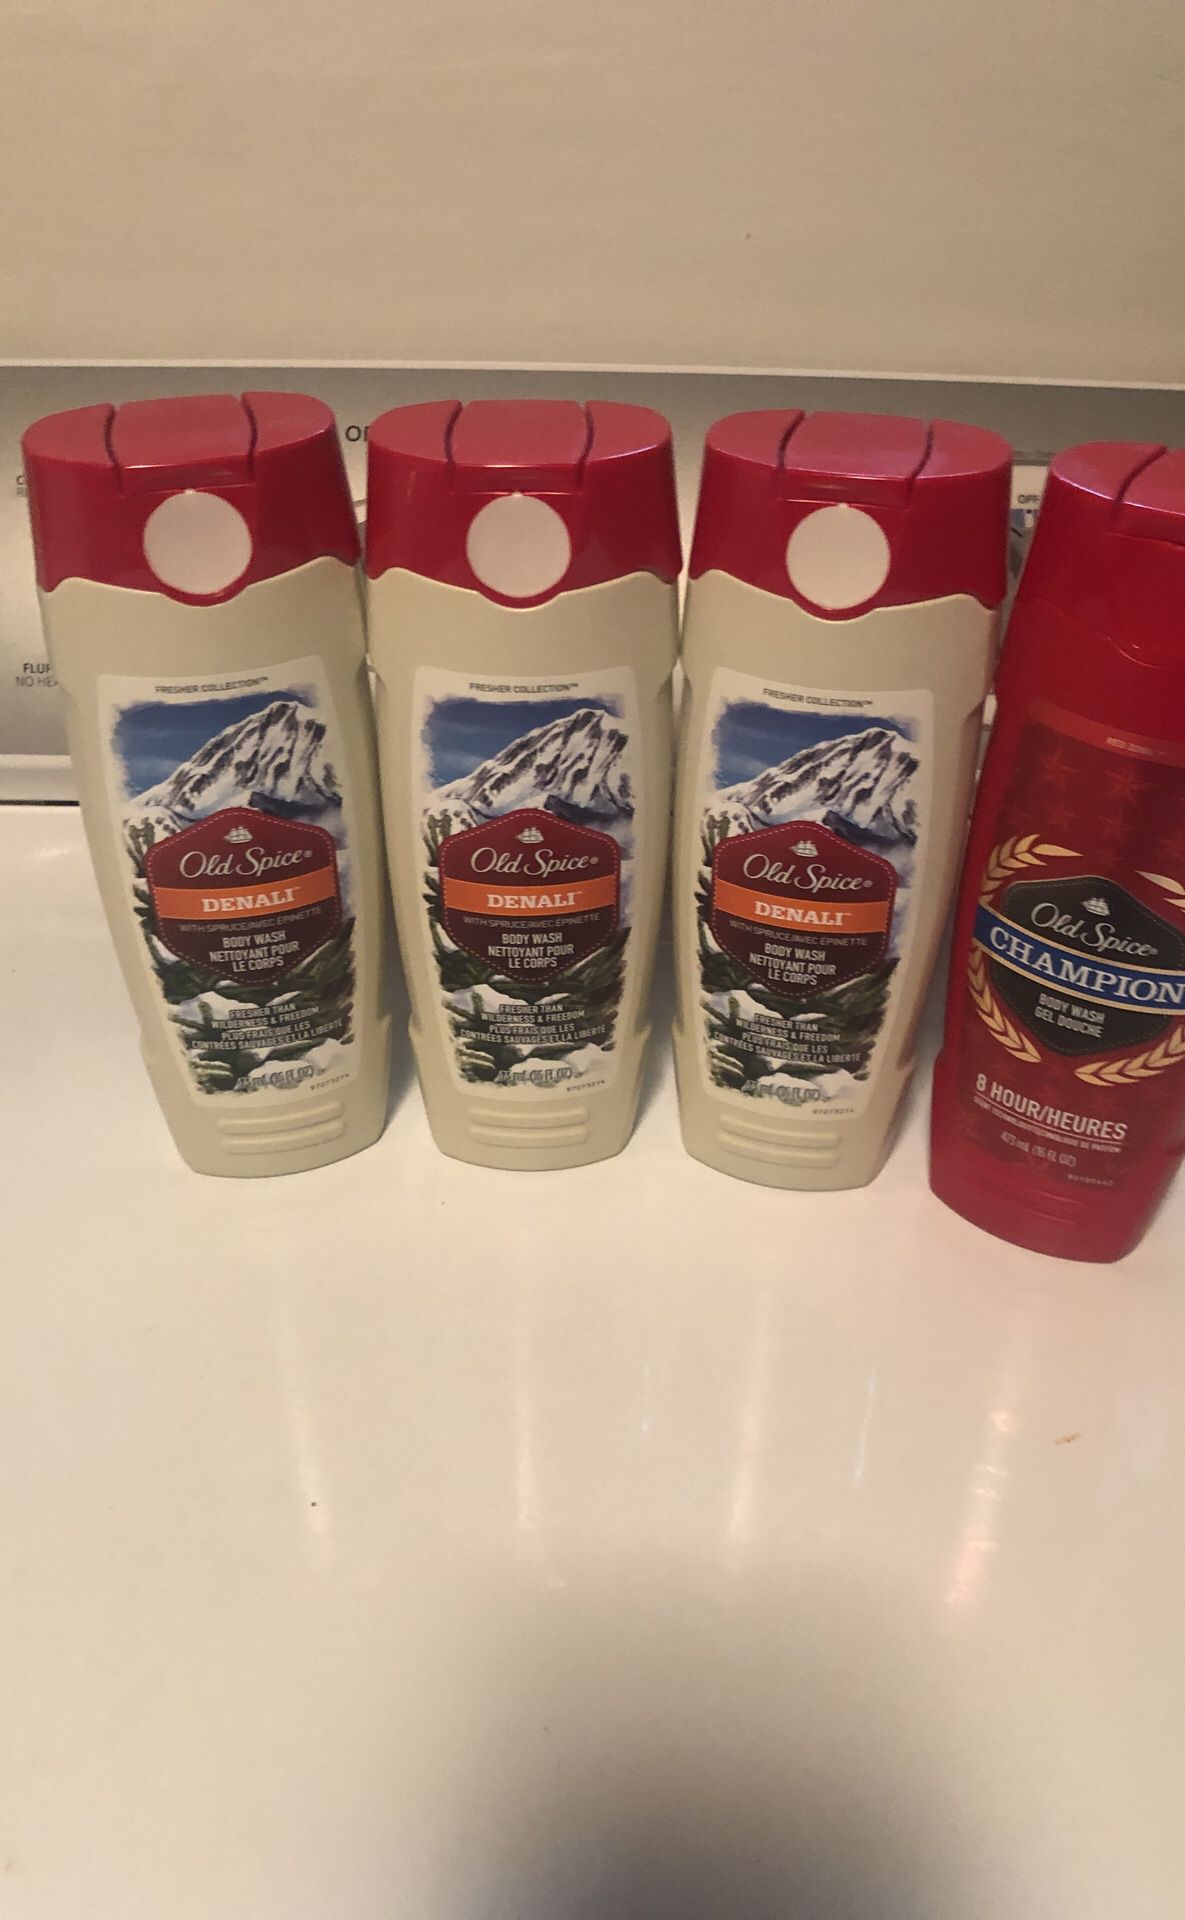 4 Bottles of Old Spice Body Wash. please see all the pictures